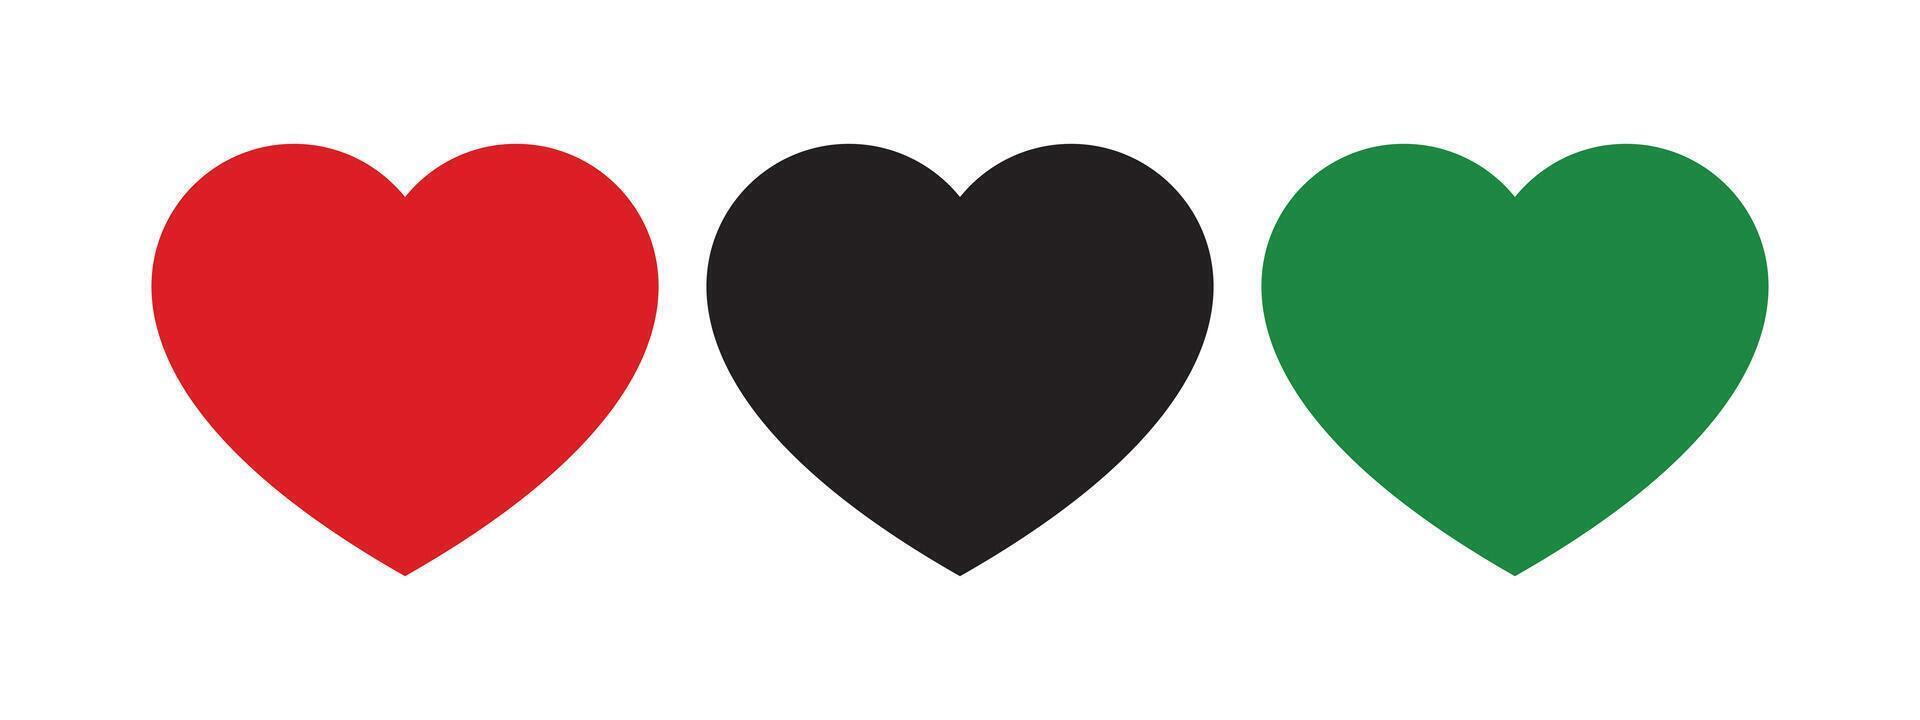 Red, black and green colored heart shape icon as the colors of the Pan-African flag. For Juneteenth and Black History Month. Flat vector illustration.